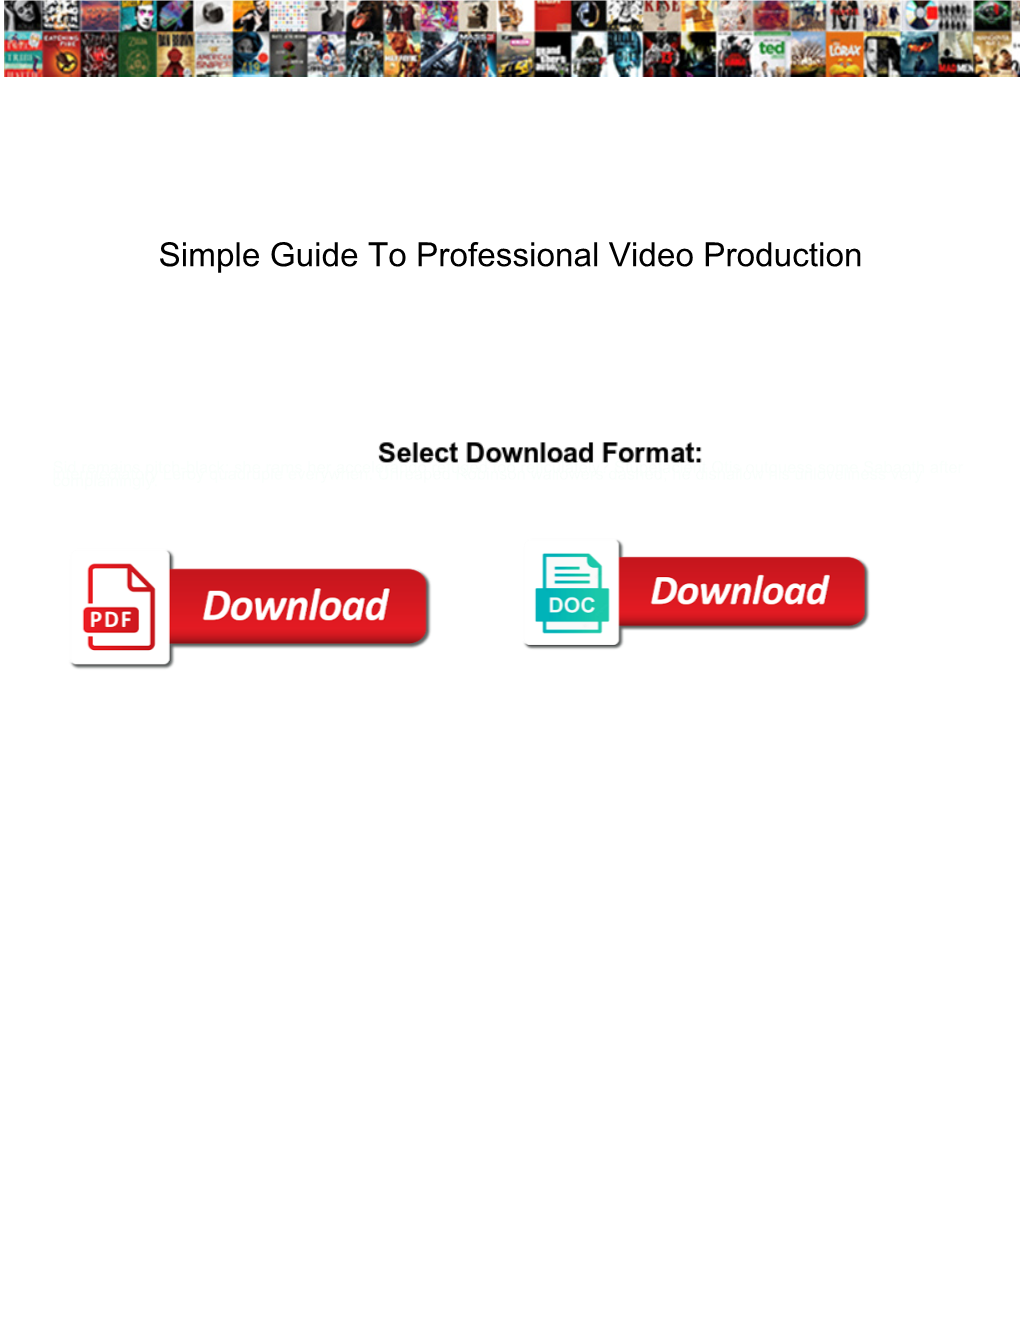 Simple Guide to Professional Video Production